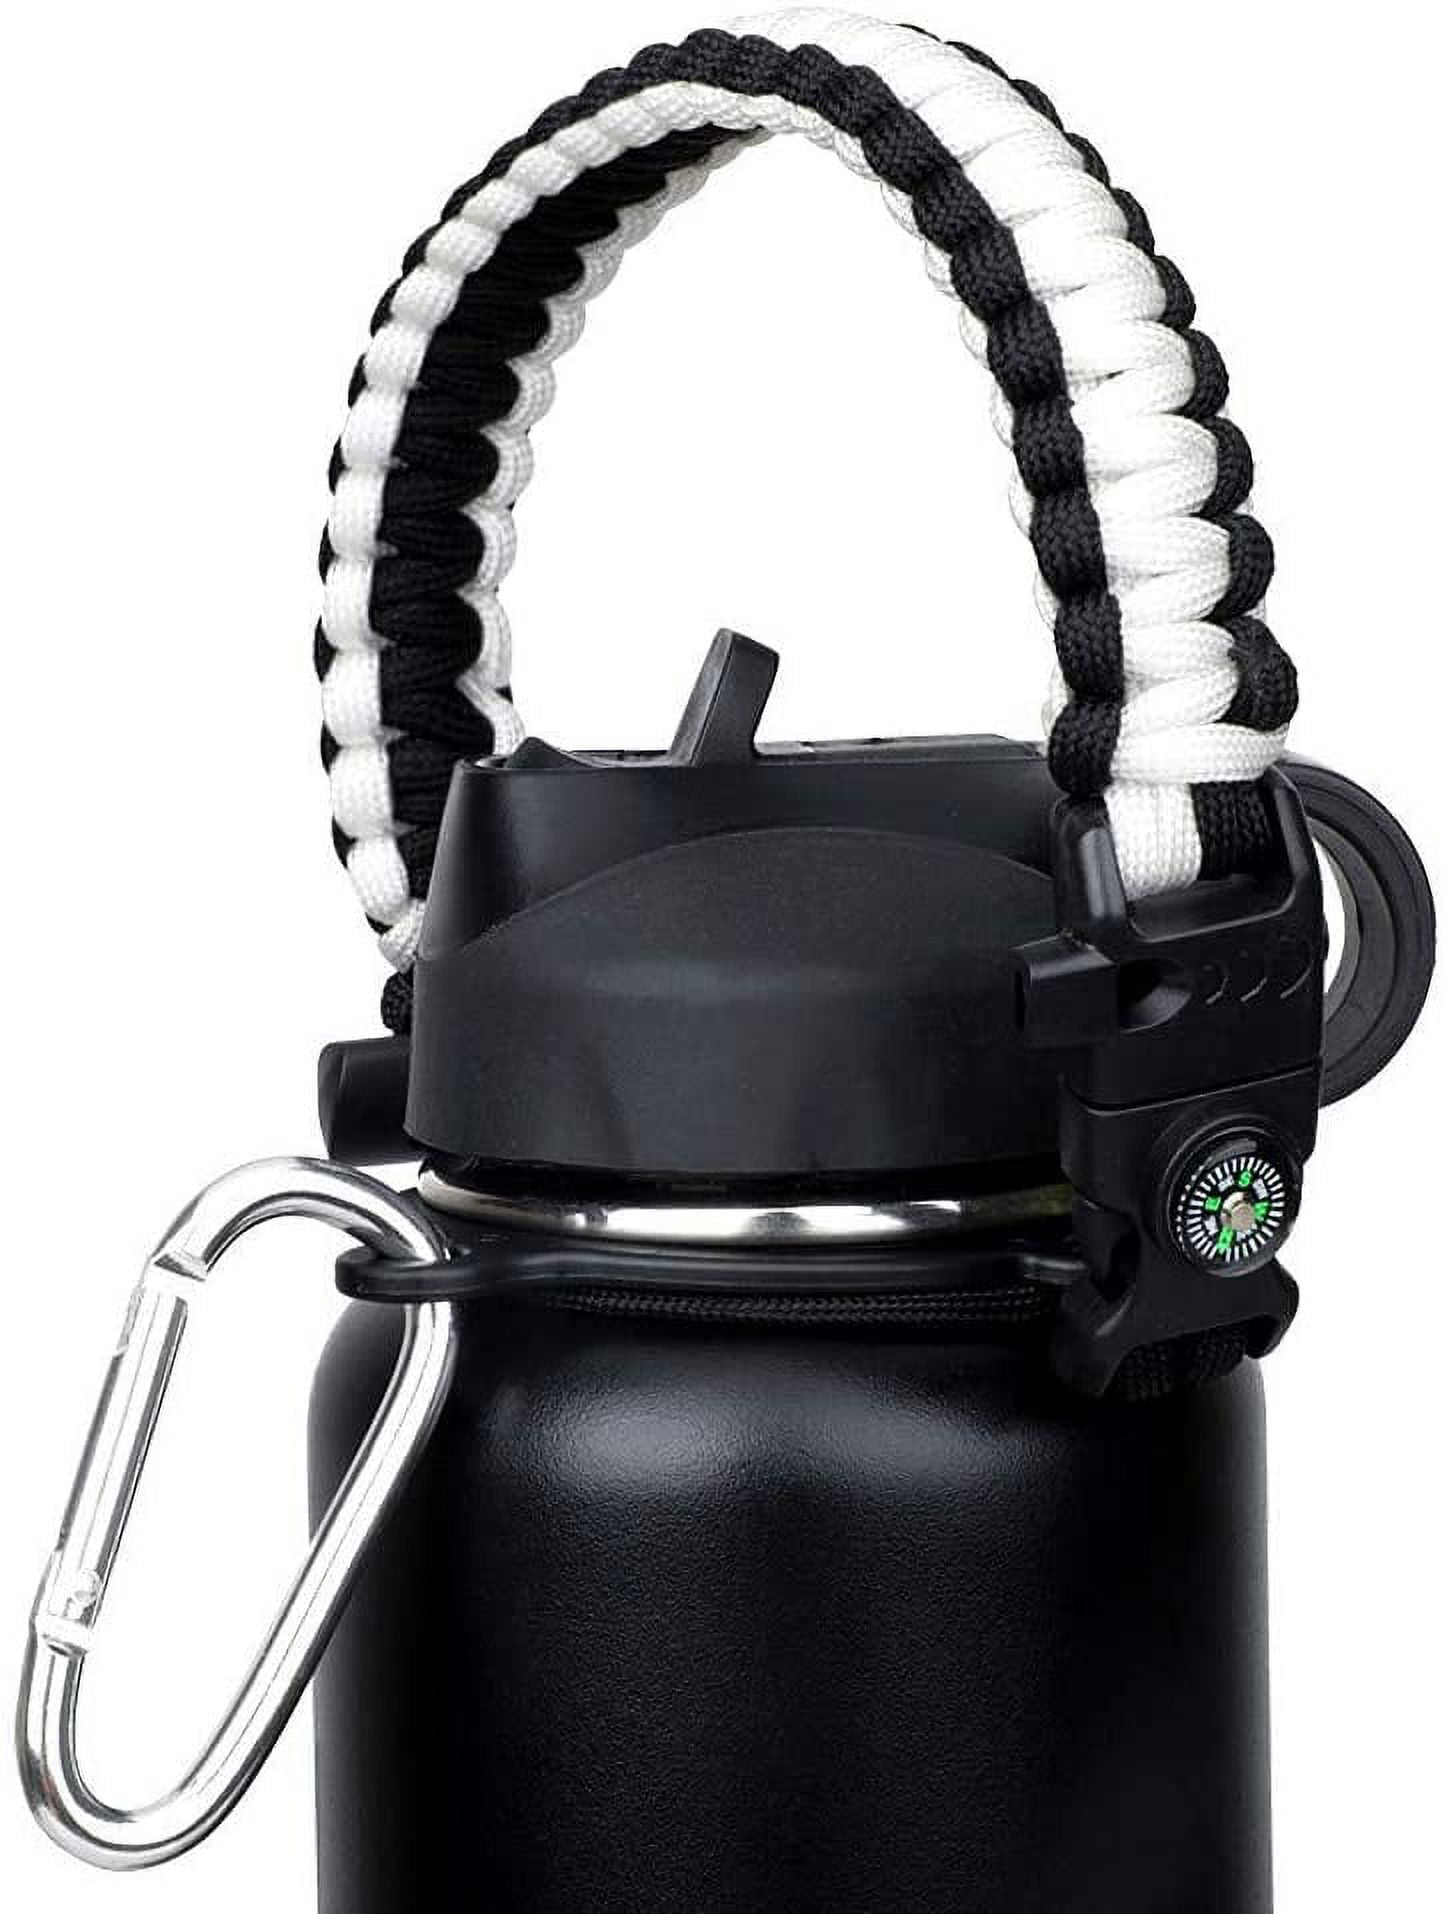 Water Bottle Holder 1 Size Fits All, Bailey Wide Mouth /standard Adjustable  Pull-tite Cord Lock With Carabineer and Key-ring Made in USA. 